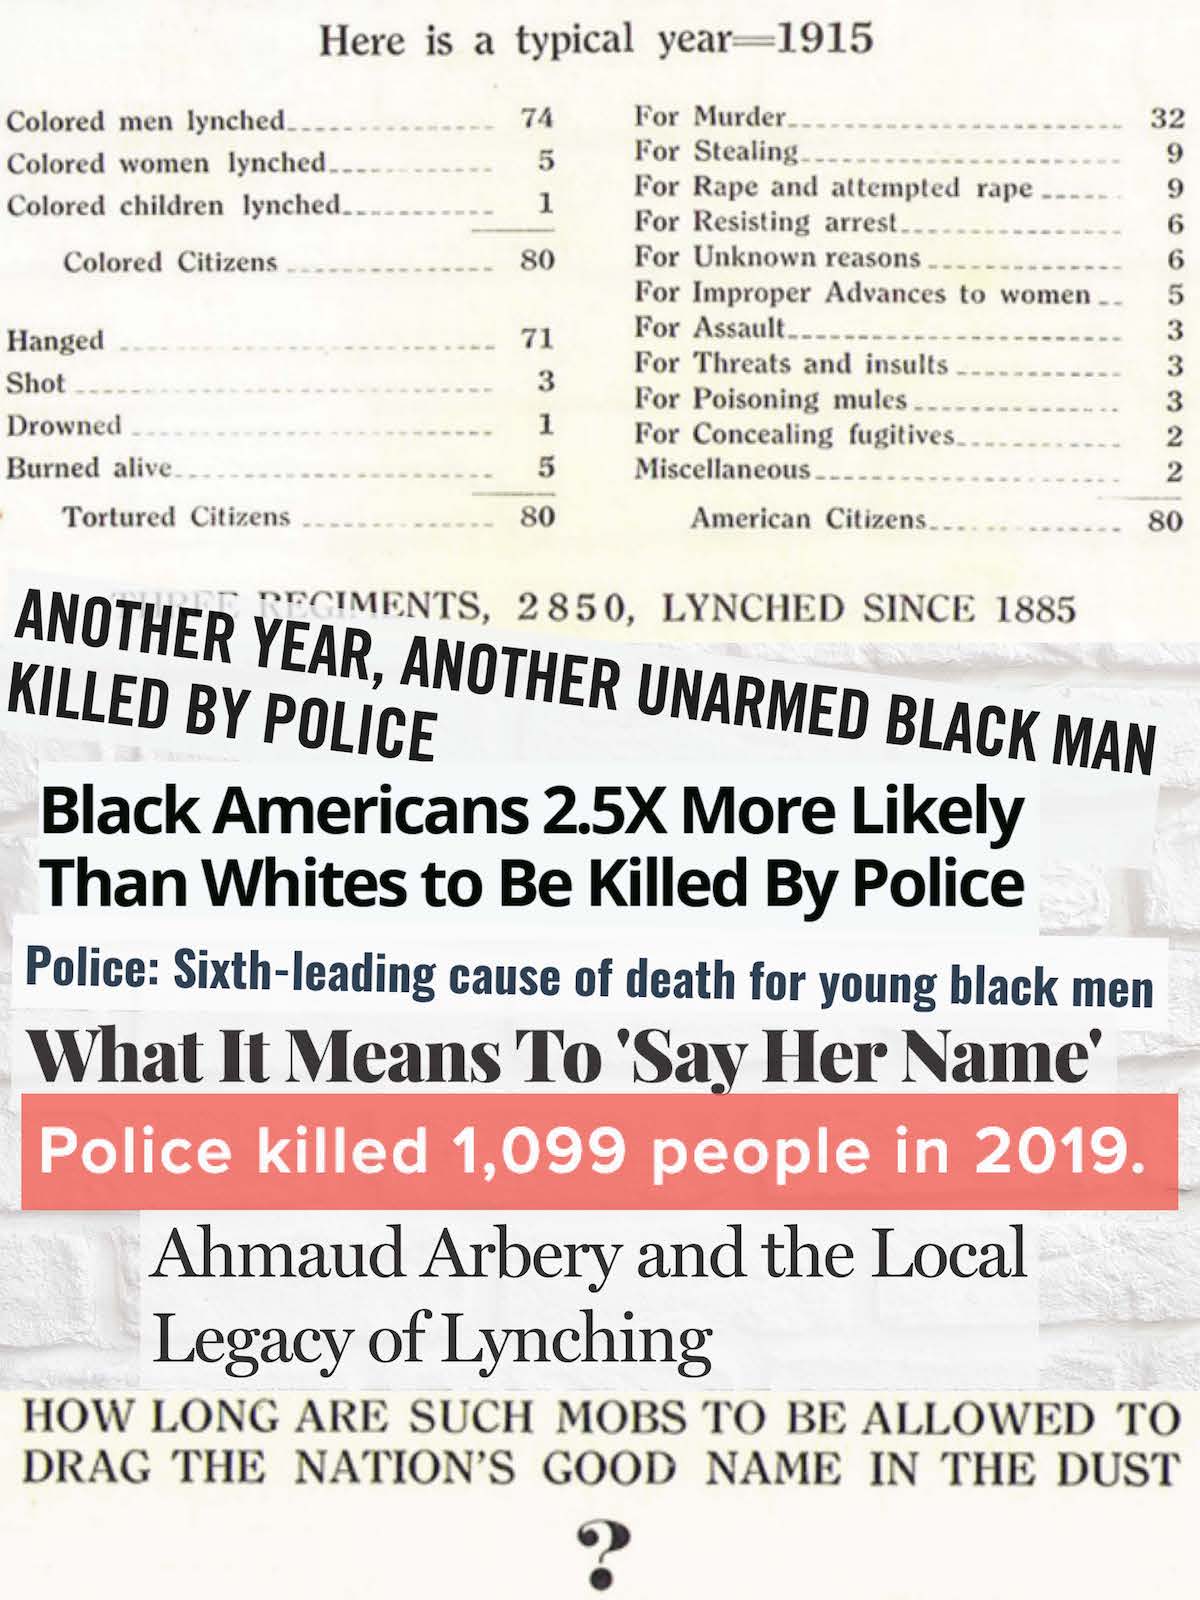 Historical book text and current headline text overlaid describing black men killed by police in 1915 and today